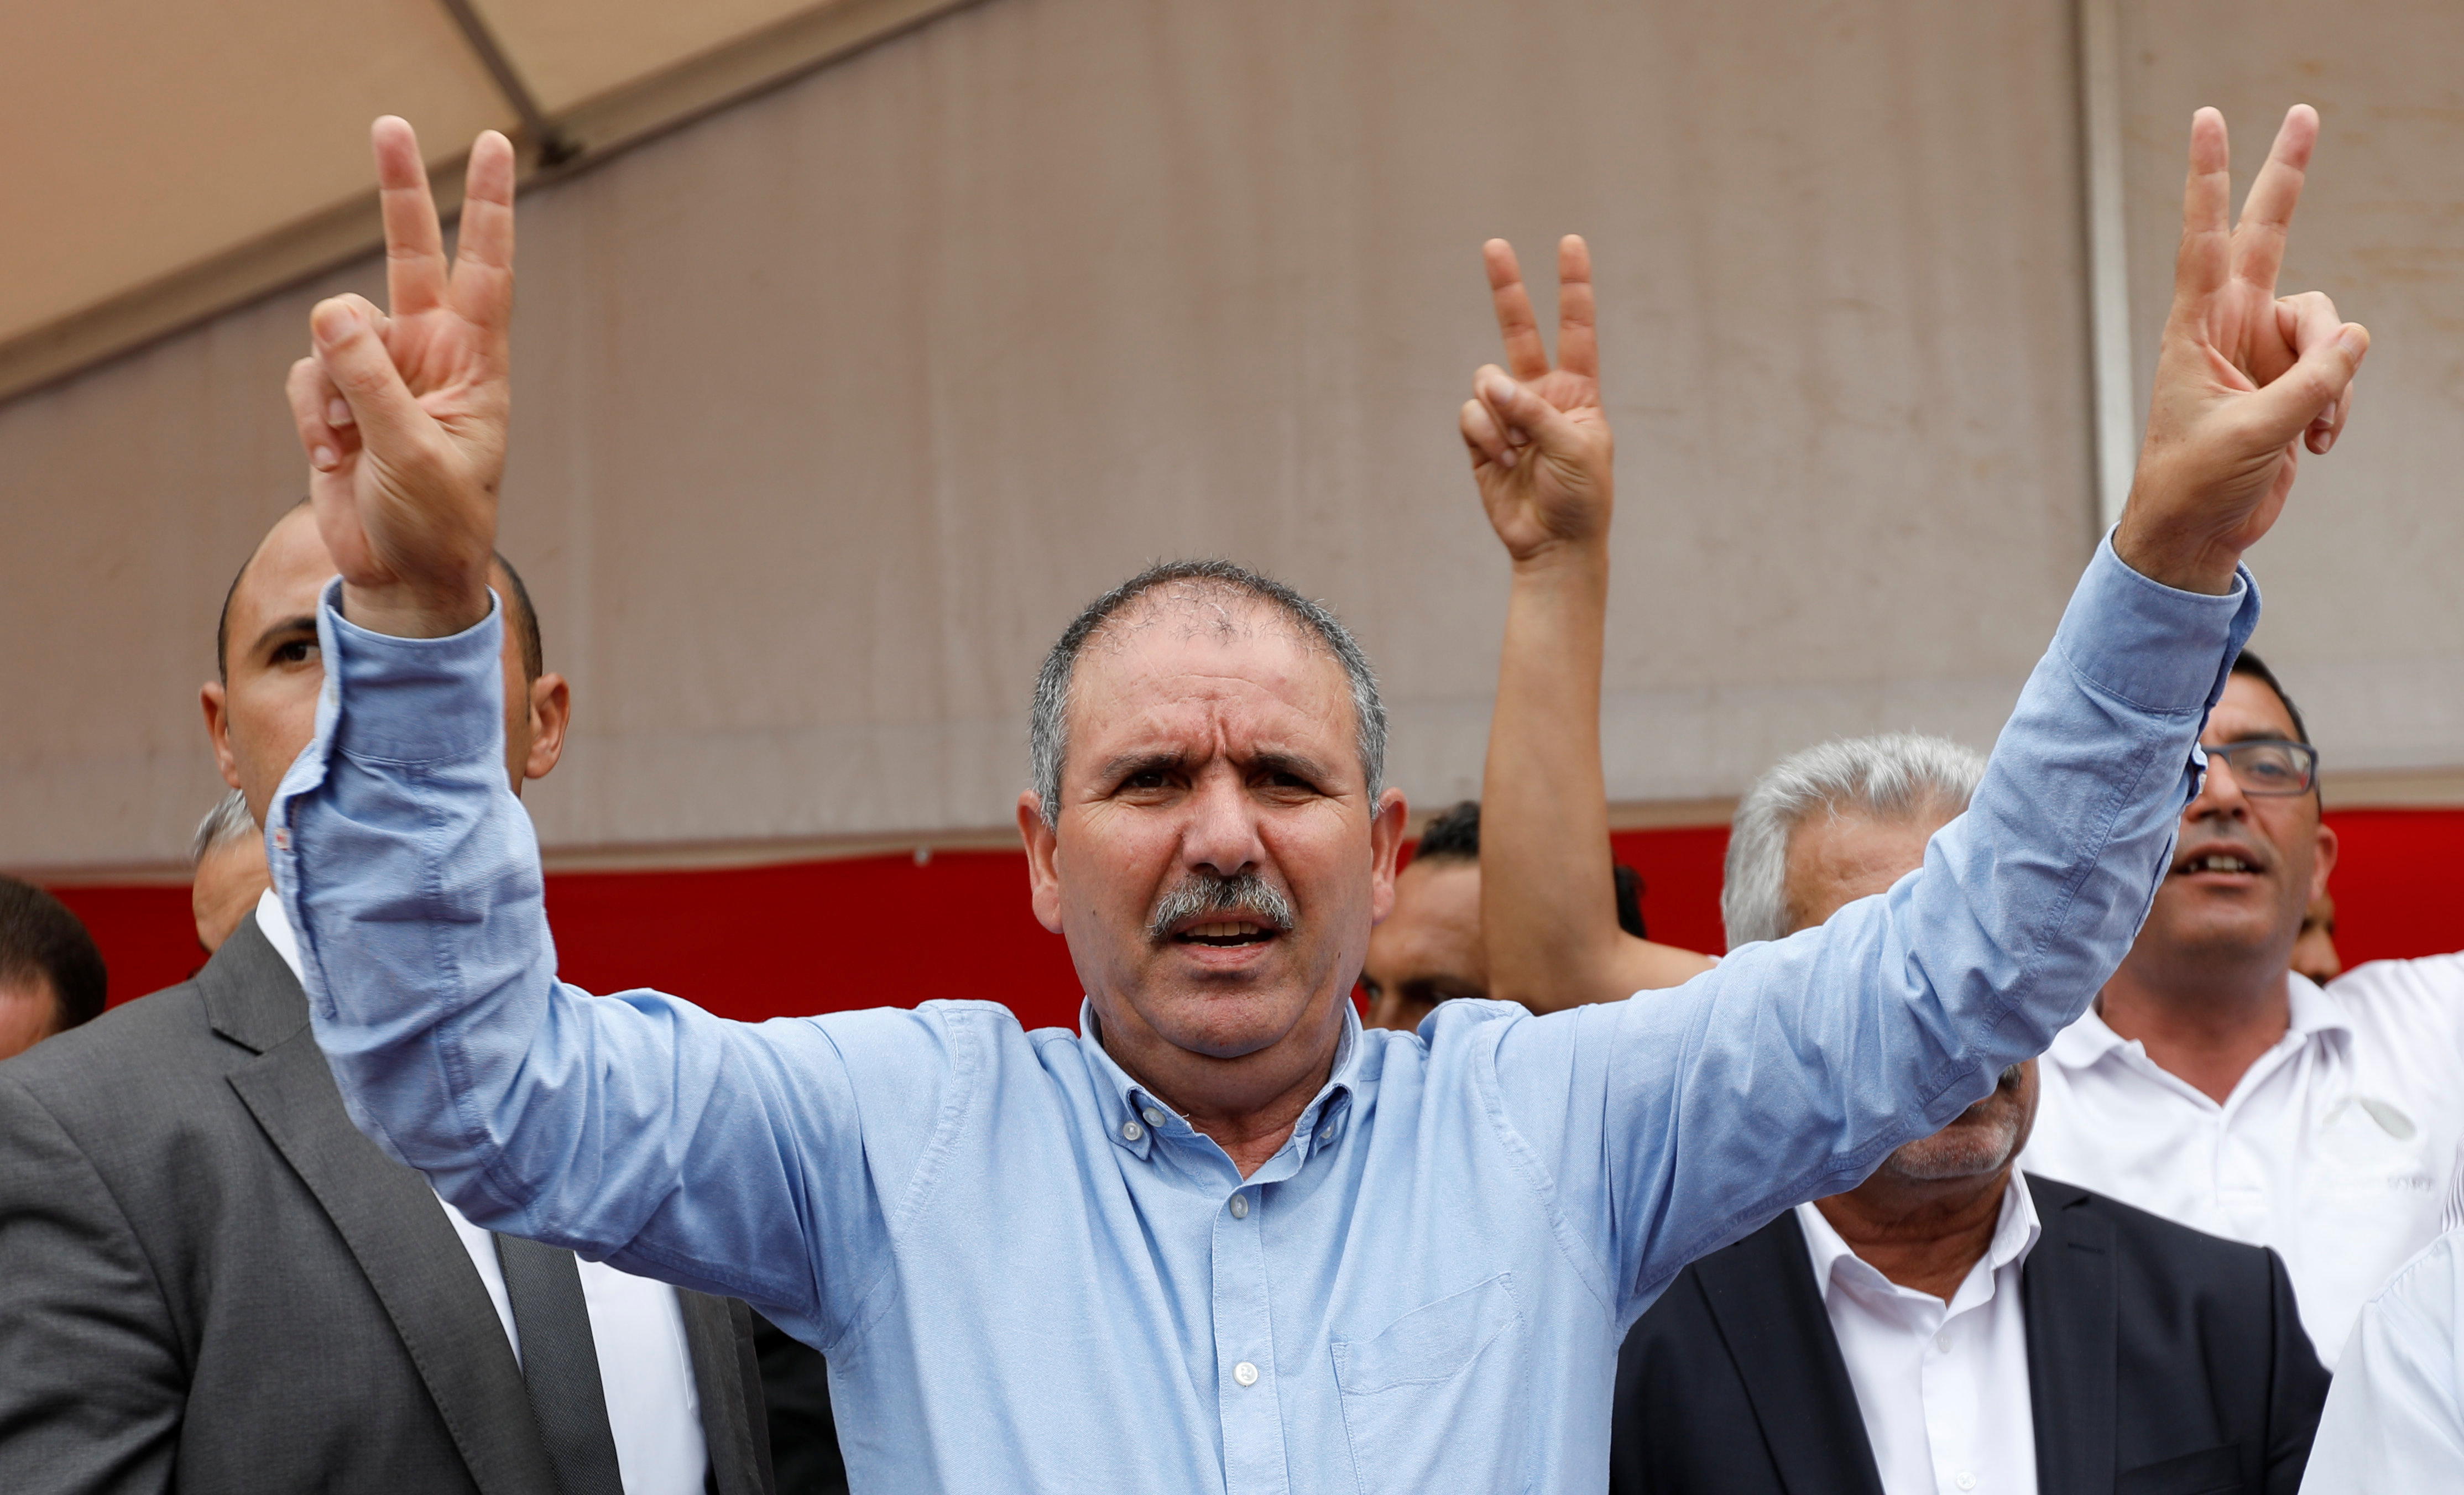 Noureddine Taboubi, secretary general of the Tunisian General Labour Union (UGTT), gestures during a workers' rally in Tunis, Tunisia